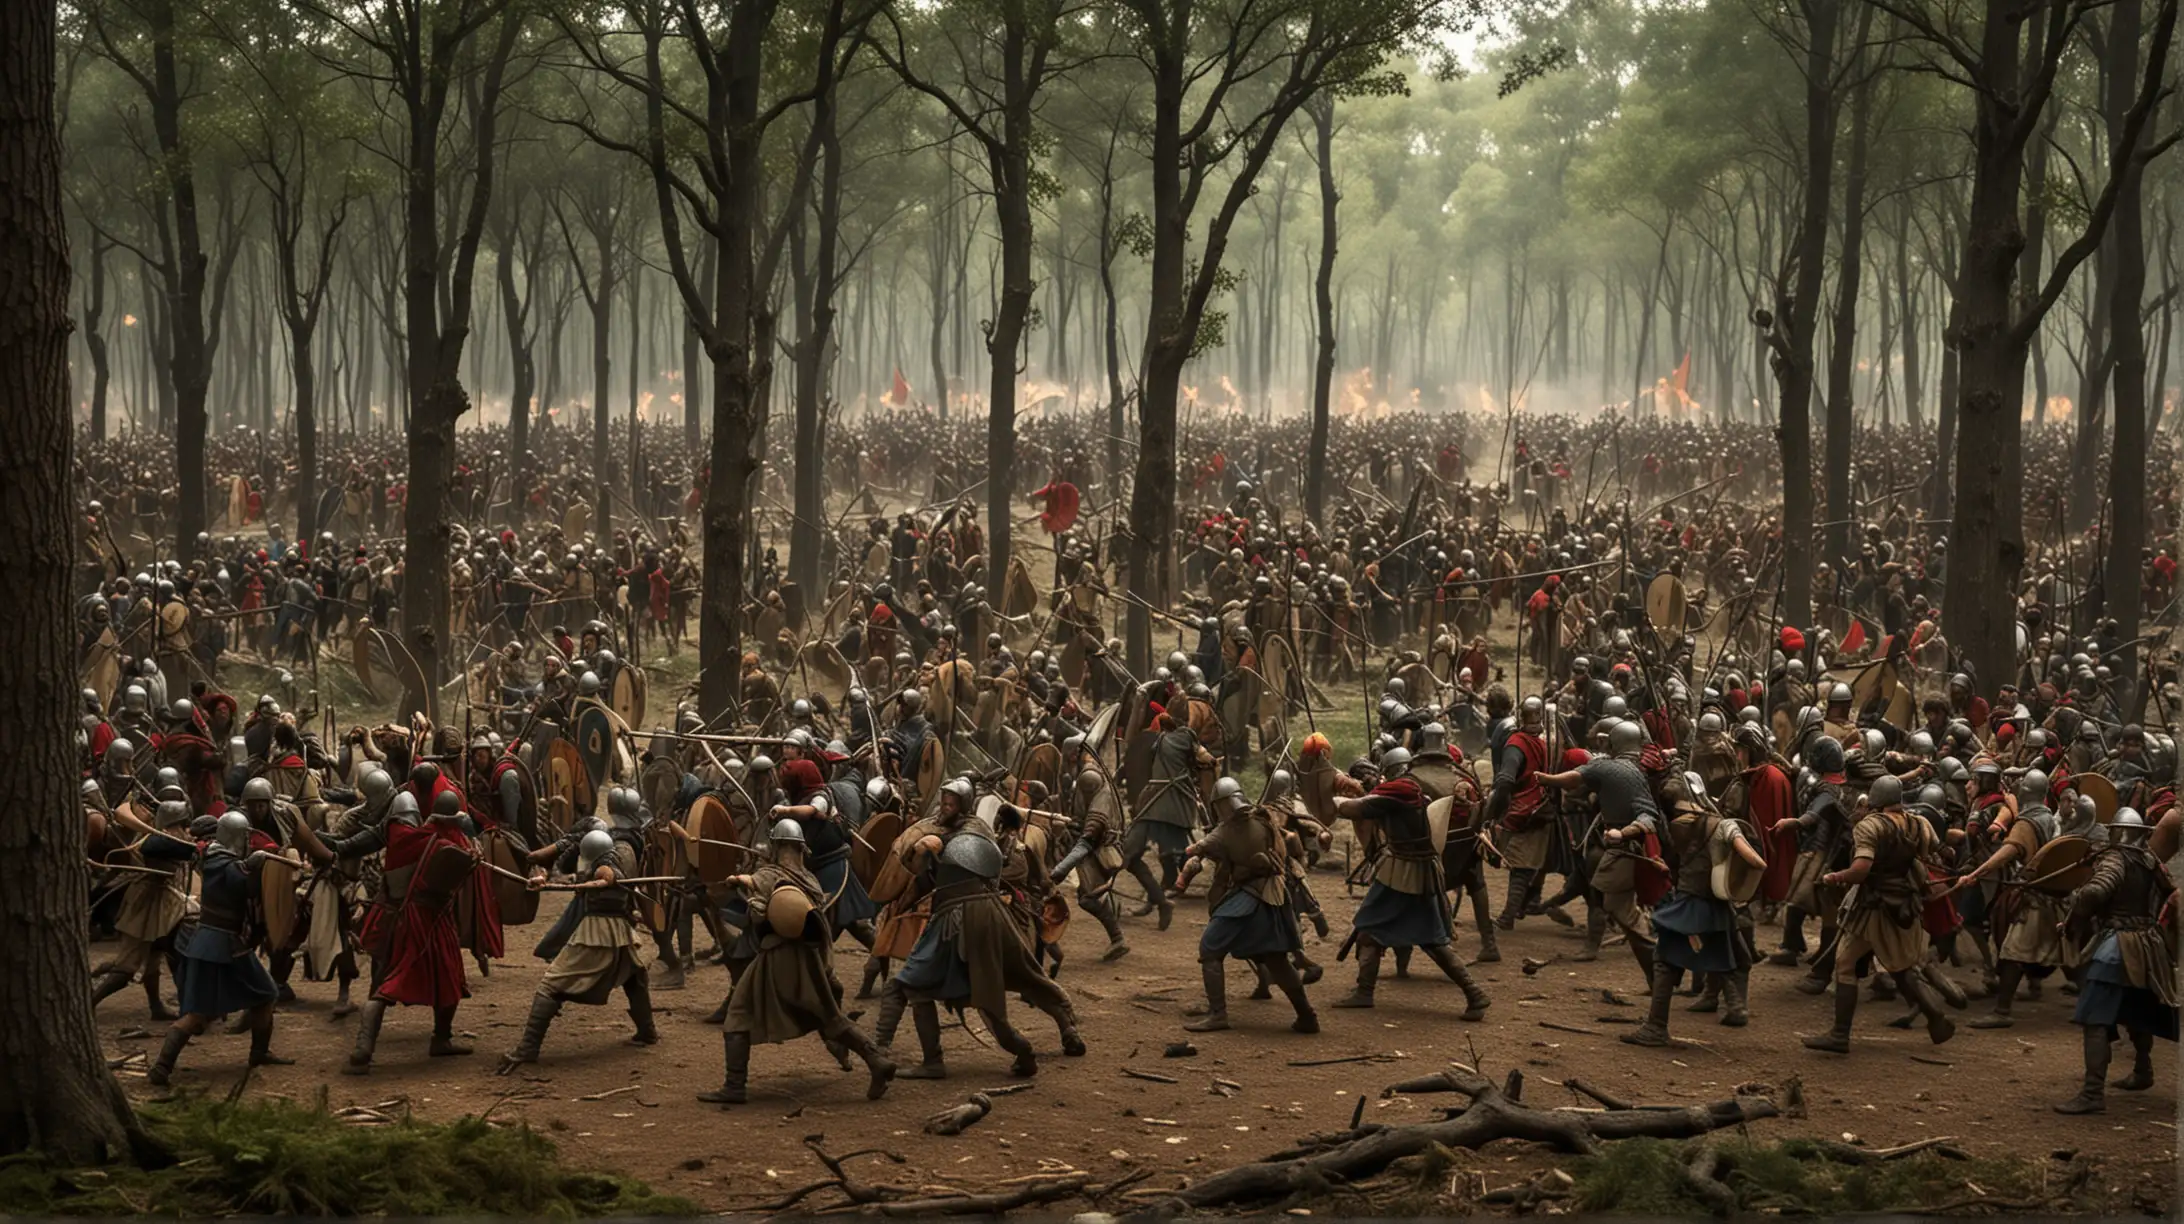 a battle scene in a forest. Set during the Biblical era of King David.